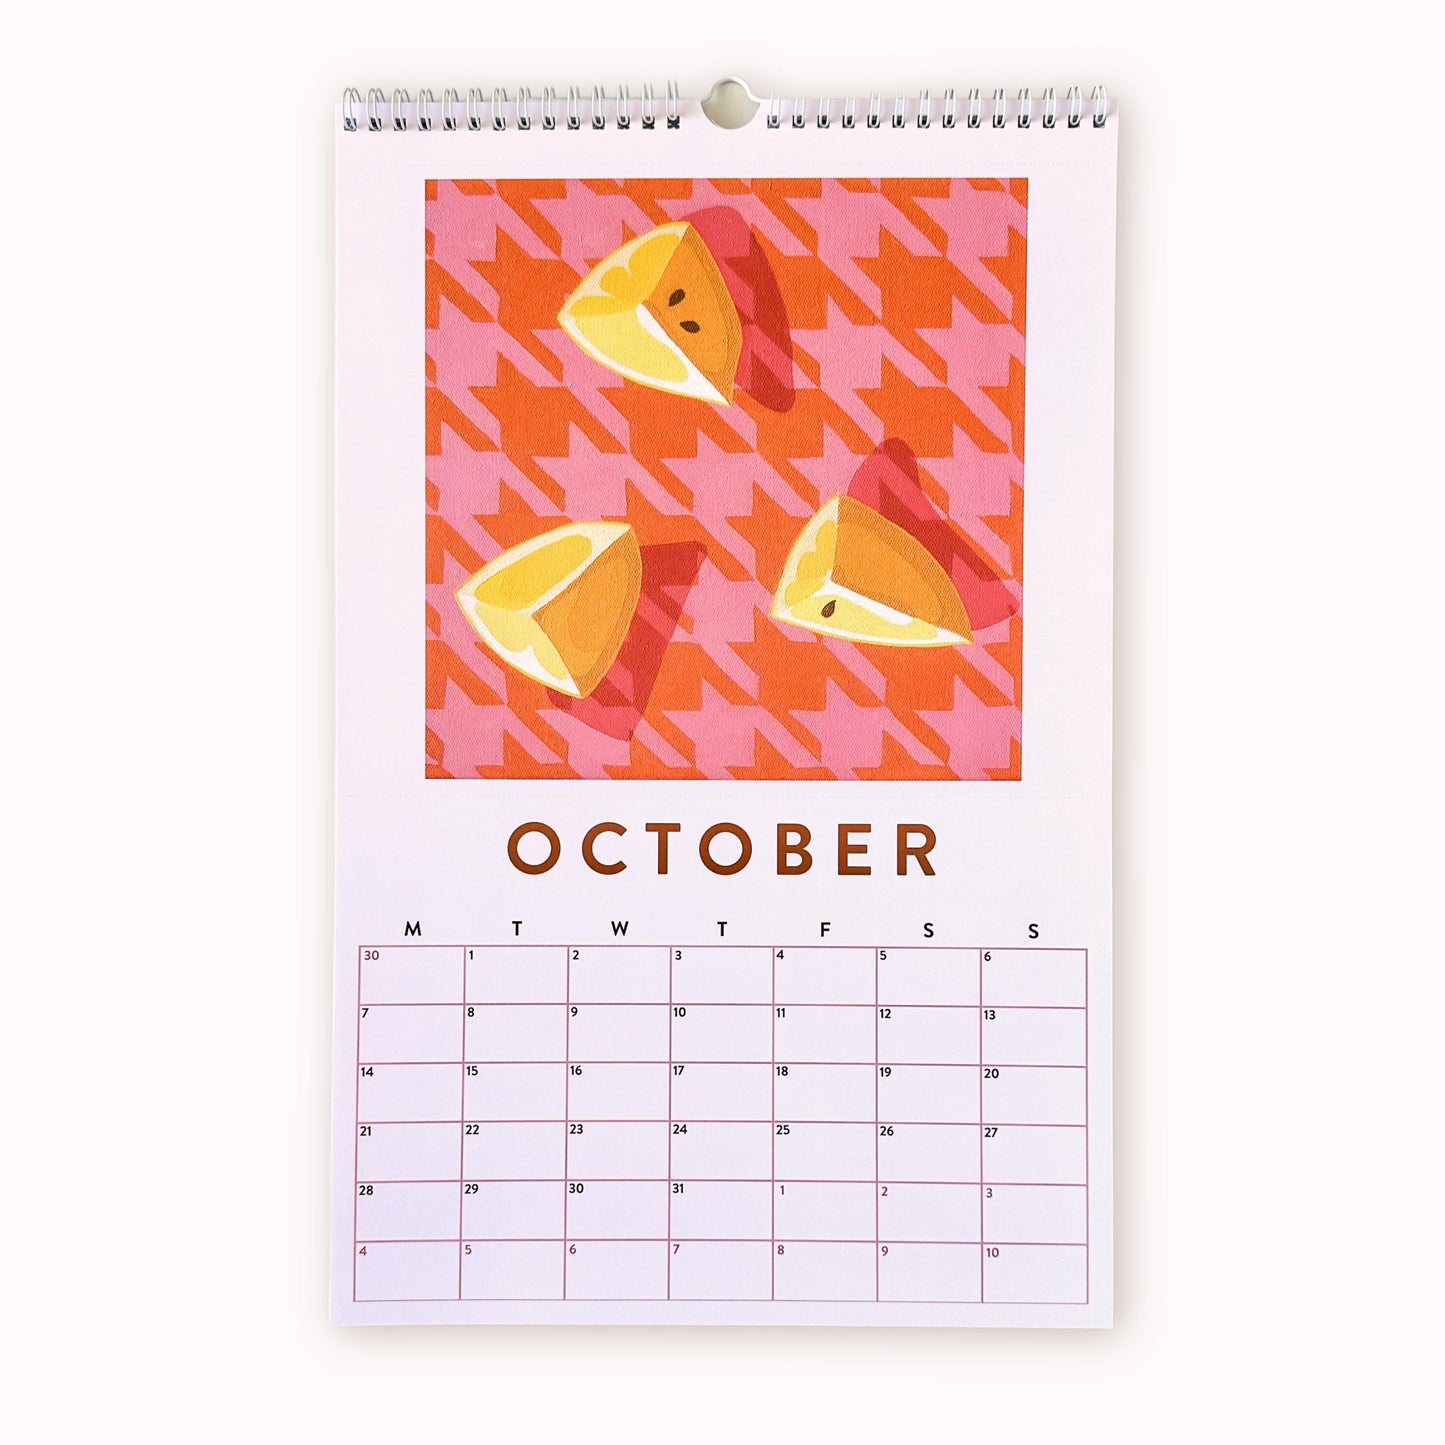 2024 art wall calendar in A3 size for the month of October, featuring a still life oil painting of yellow lemon slices on a pink and burnt orange houndstooth patterned background